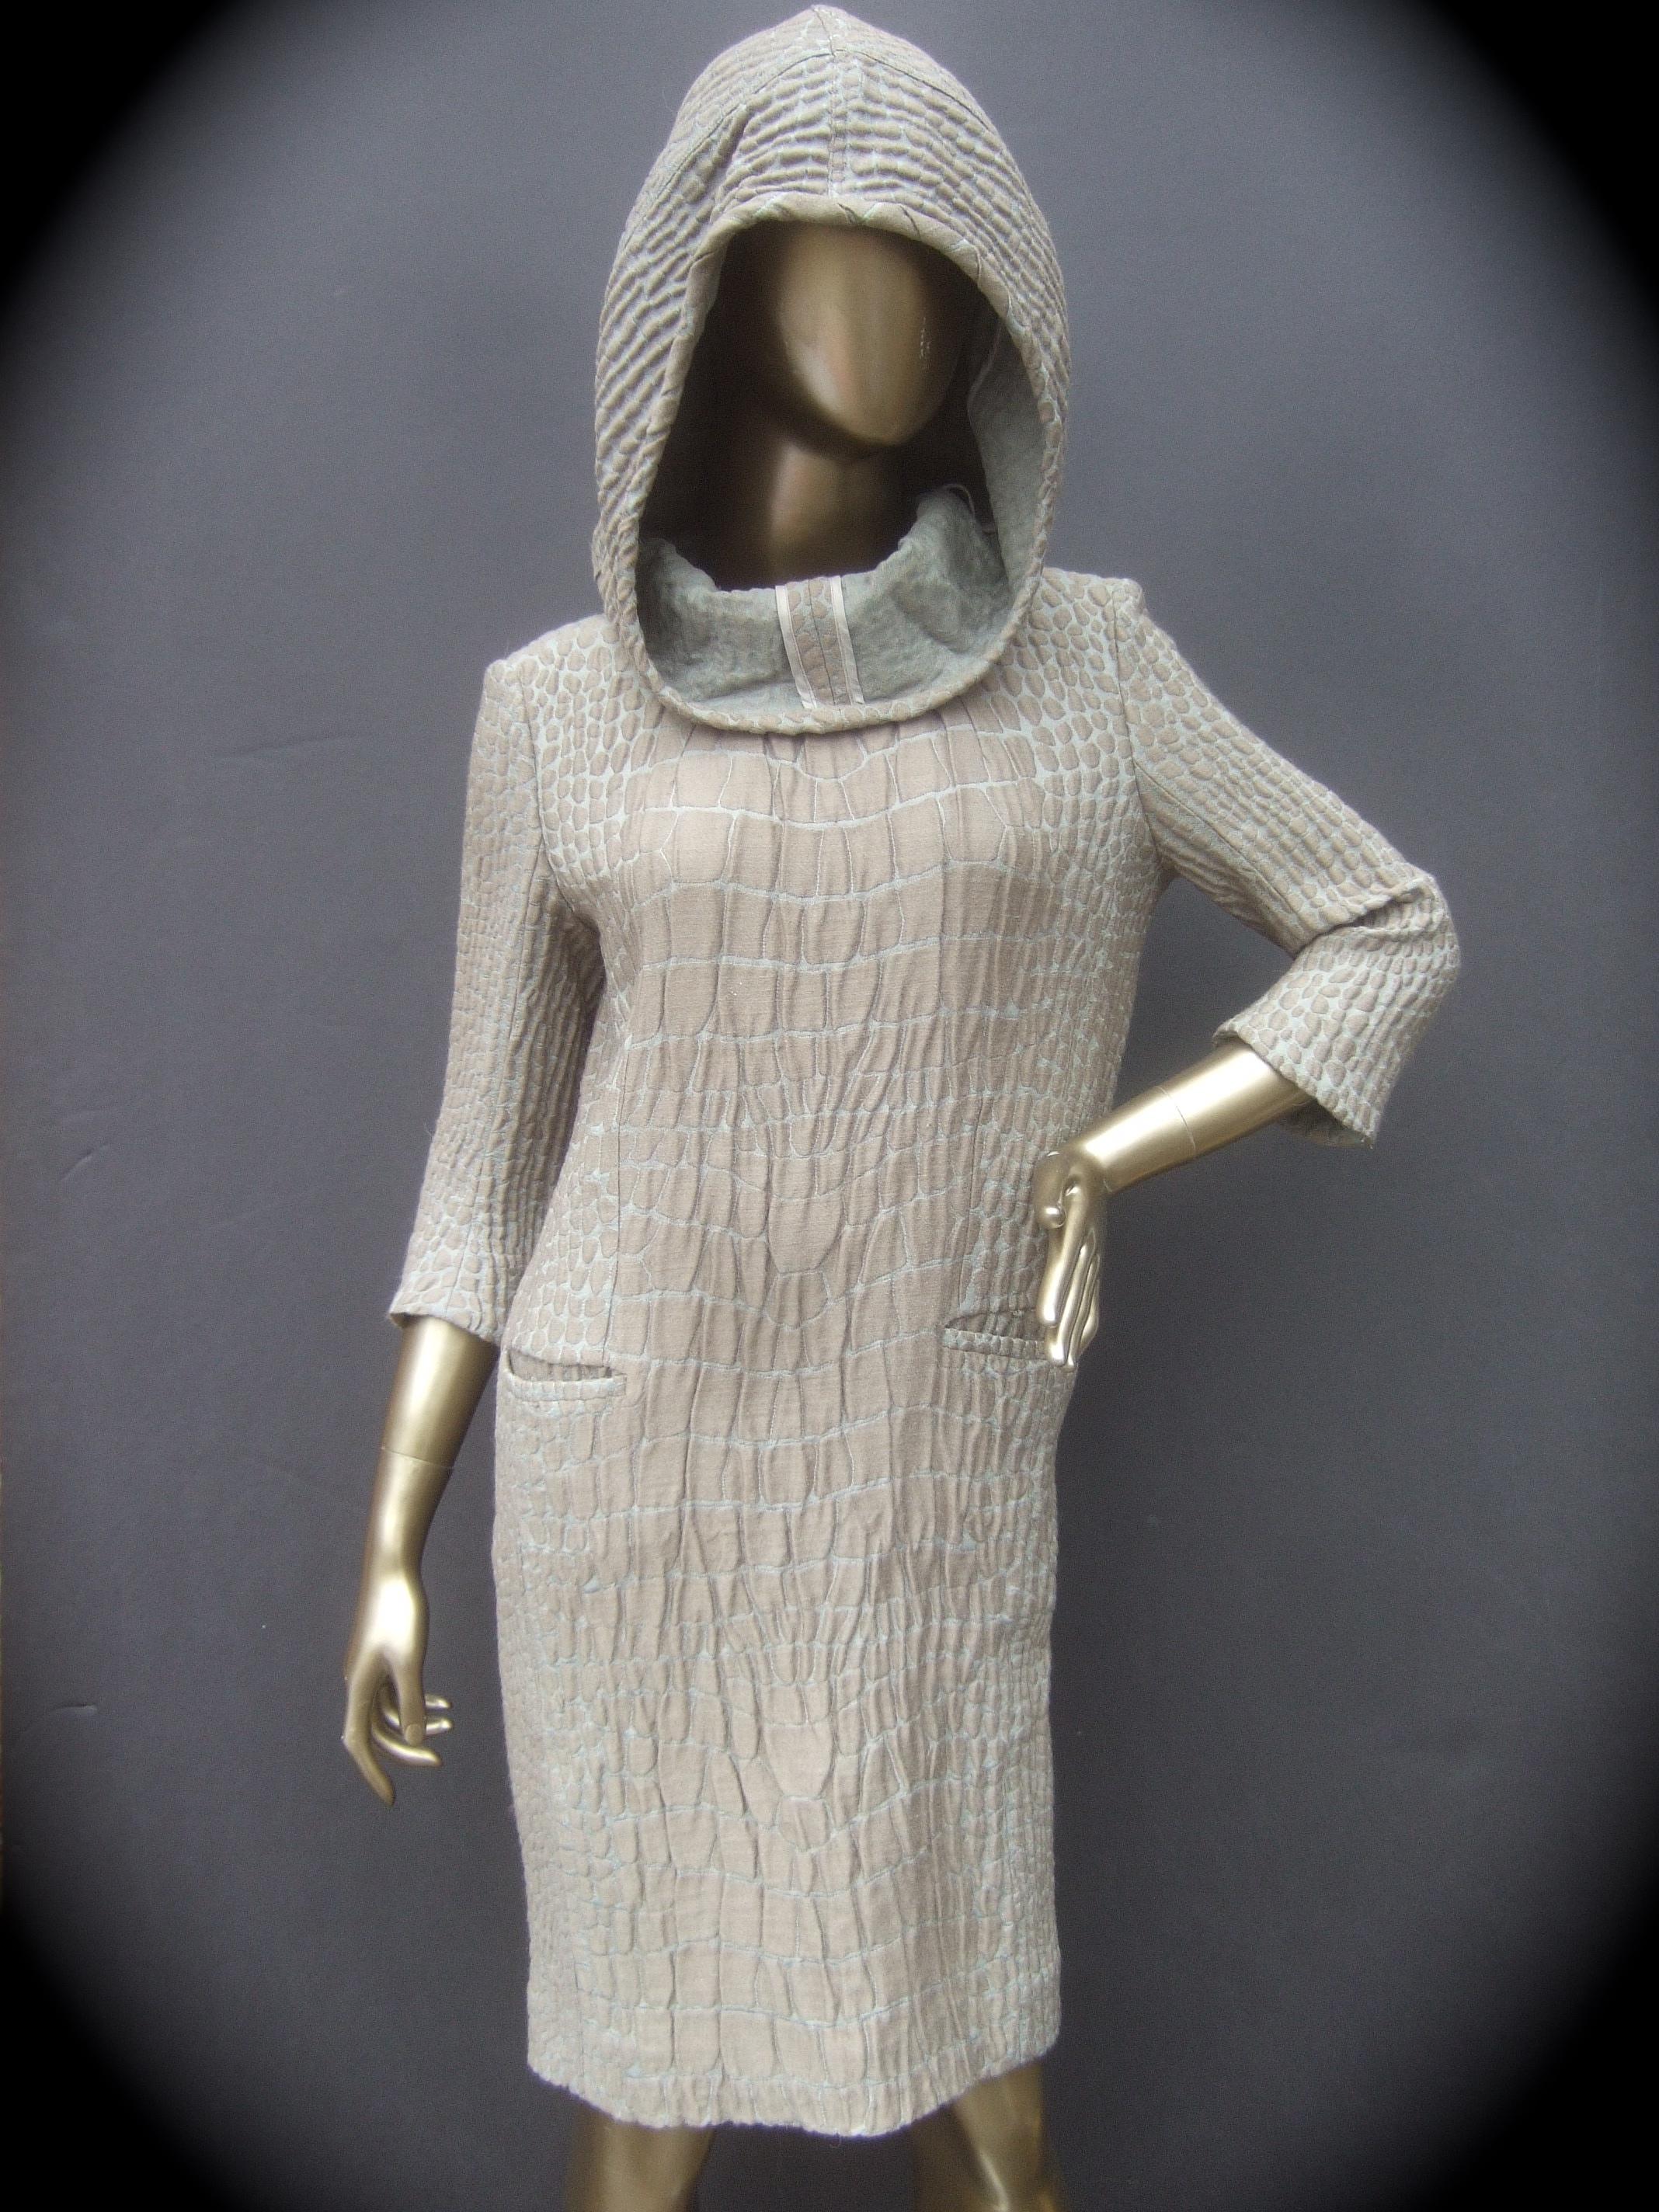 Yves Saint Laurent Rive Gauche Avant-garde hooded dress 
The edgy boxy tunic style dress is designed with a subtle textured crinkled pattern that emulates reptile scales

The unique design may be worn with the hood placed over the head; for a